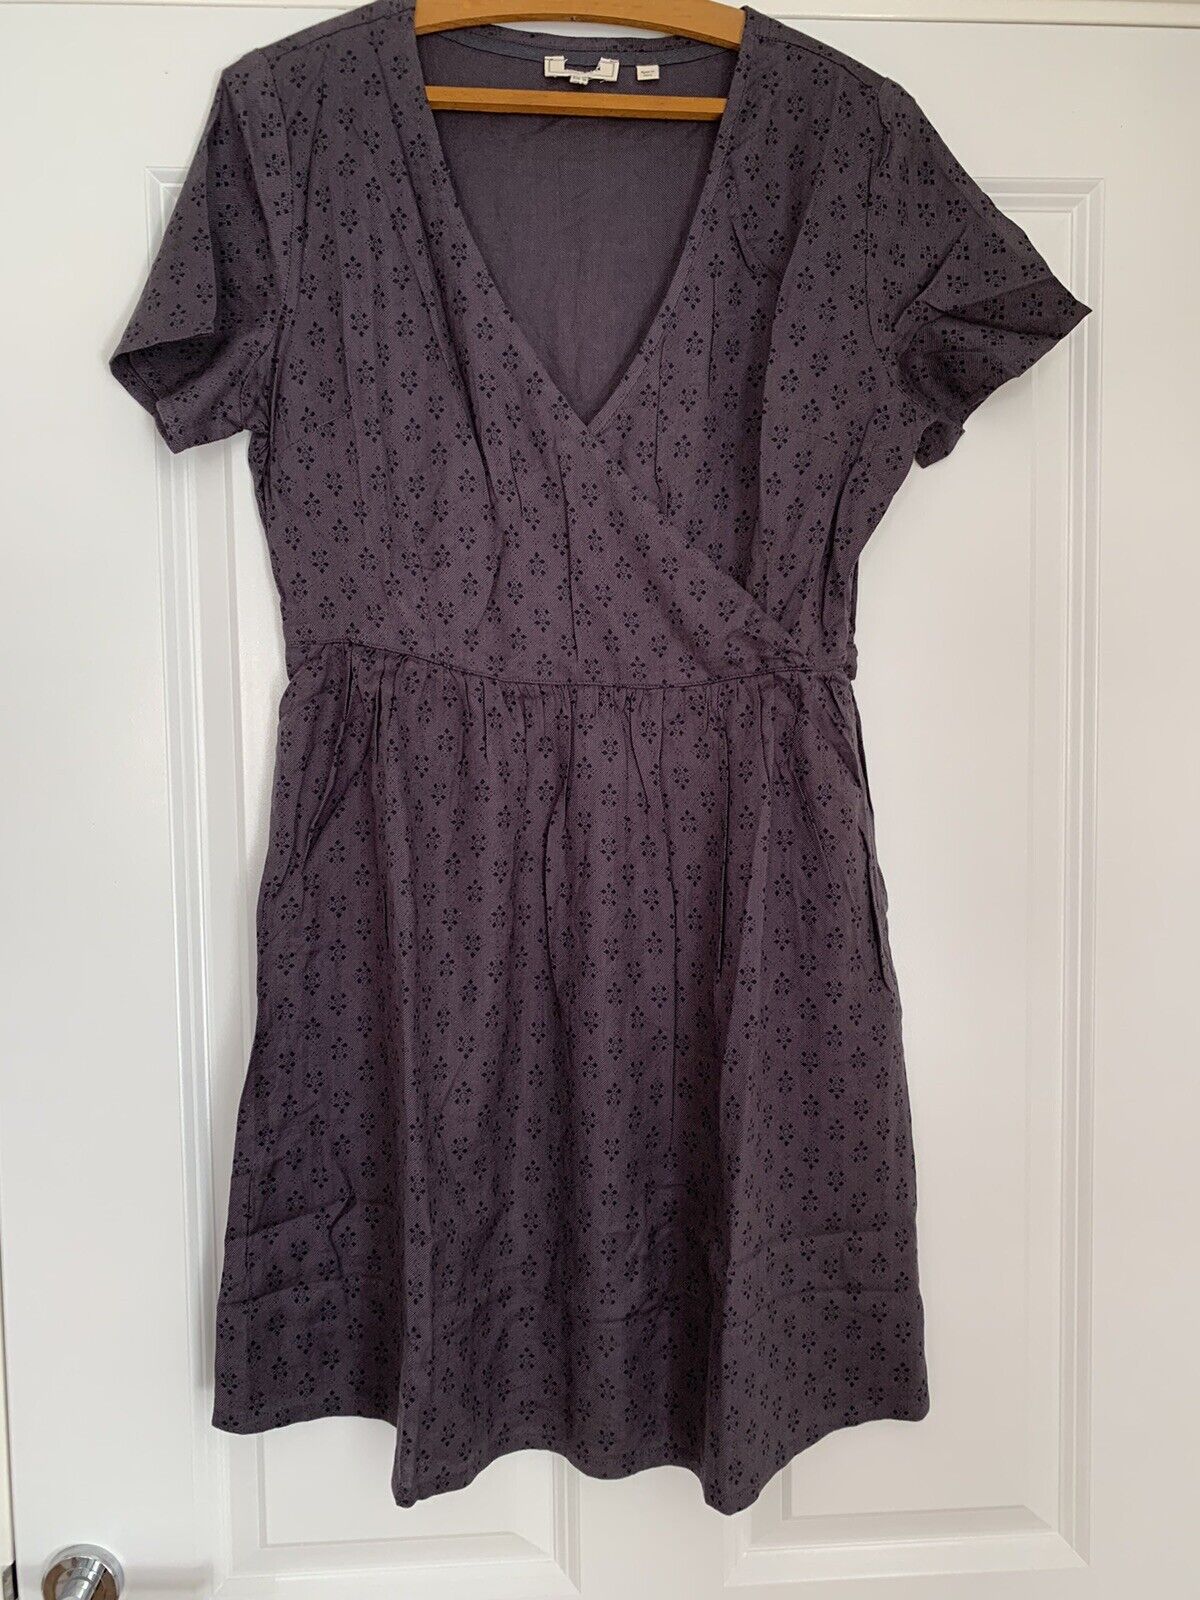 EX Fat Face Wrap Front Tunic Dress in Size 10